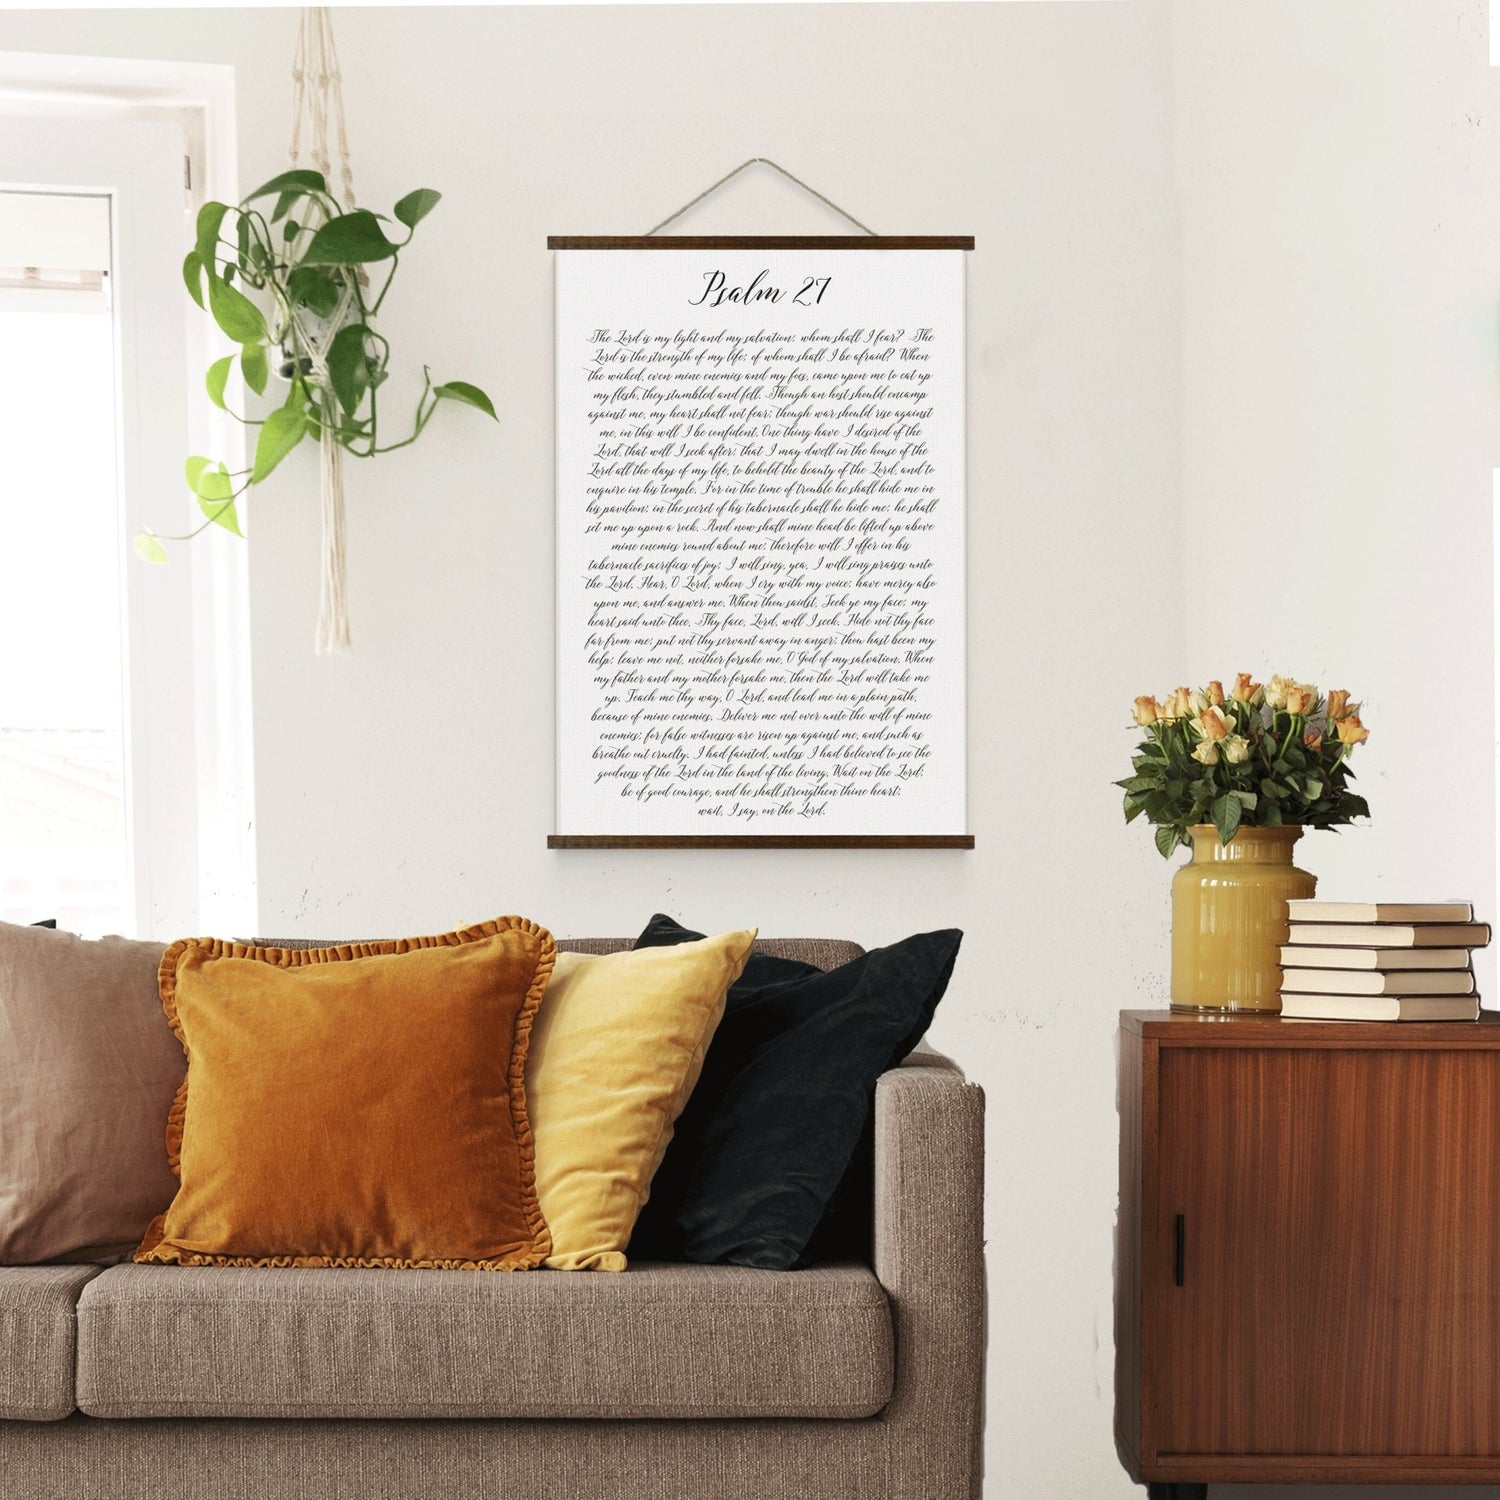 Scripture HANGING CANVAS Psalm 27 | Christian Wall Decor | Bible Verse Hanging Canvas | Psalm 27 Scripture Wall Art Wood Hanging Canvas - Forever Written